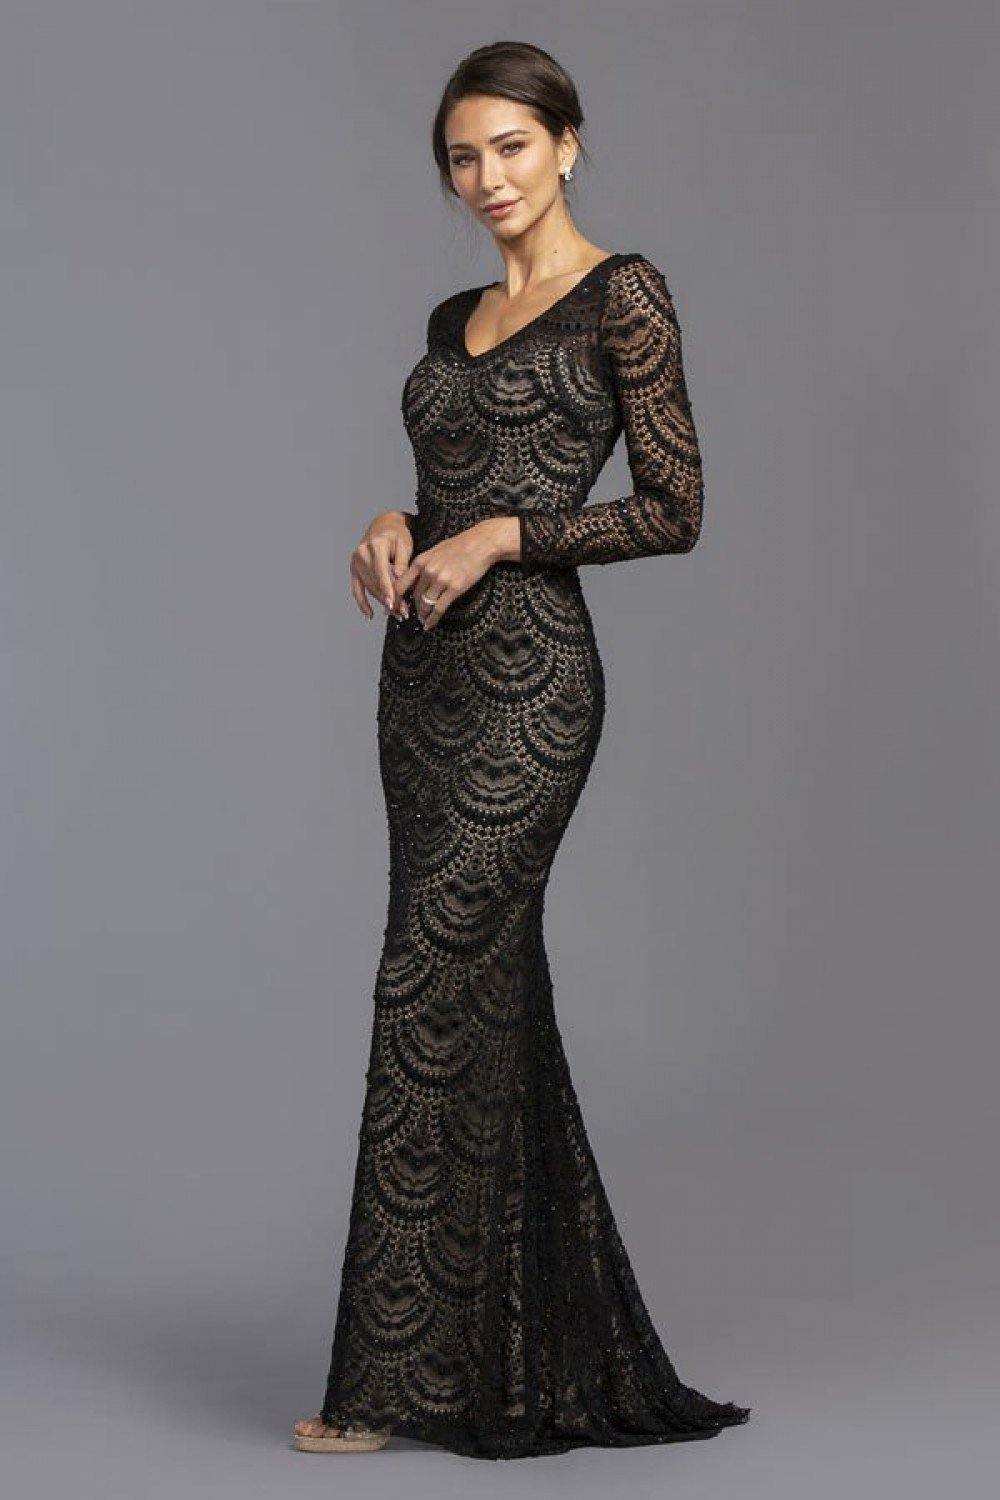 Long Fitted Formal Dress Sale - The Dress Outlet